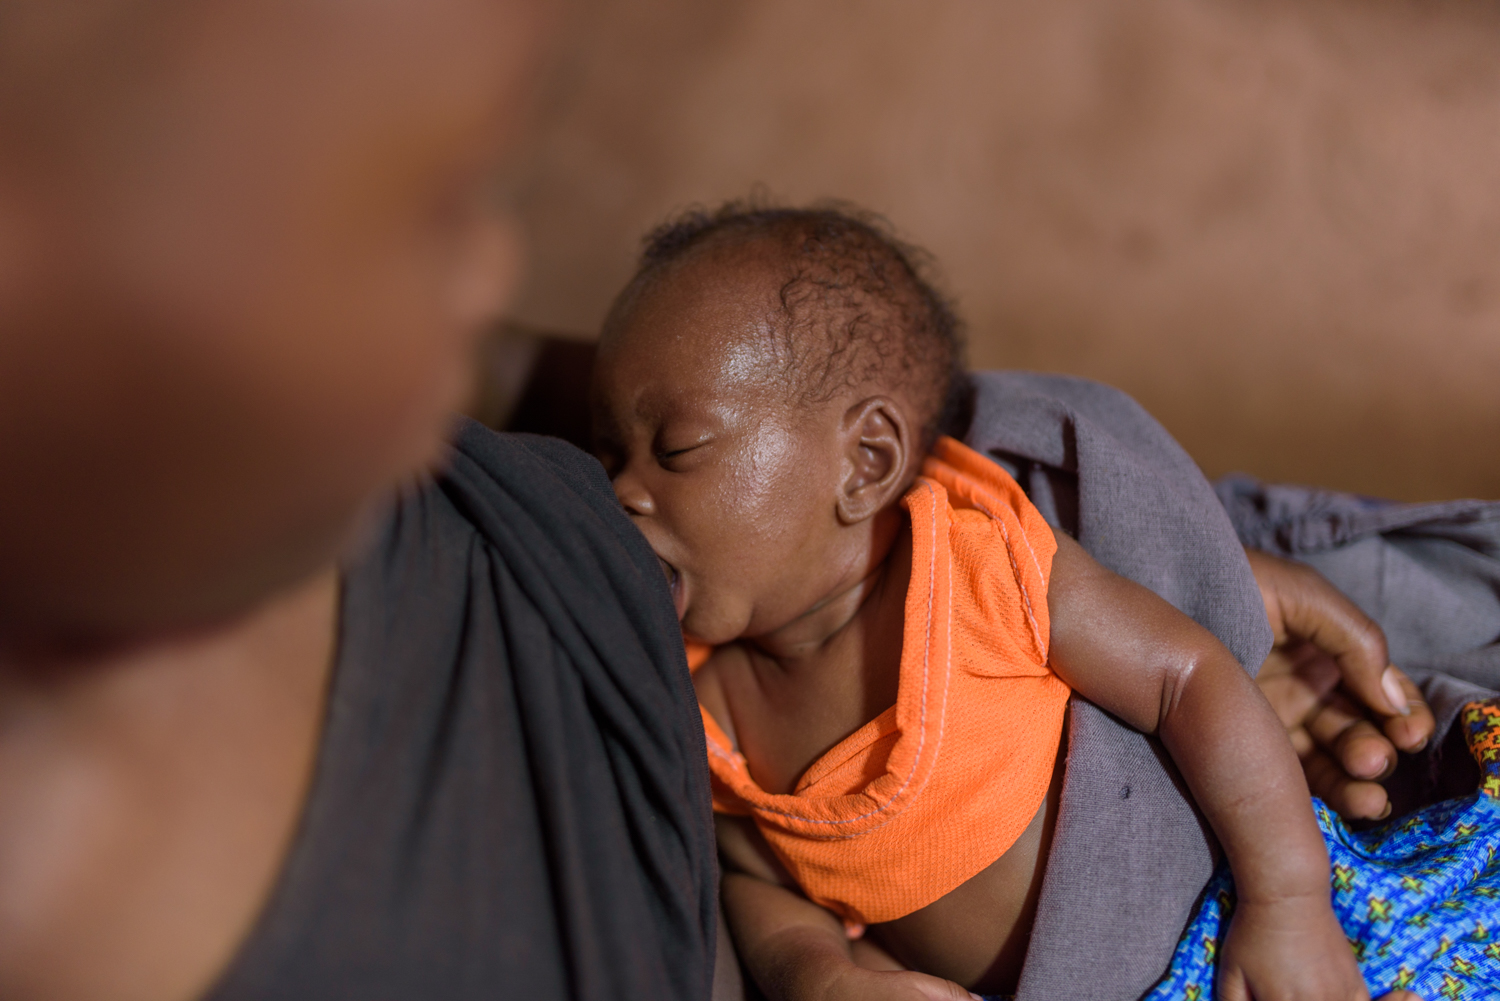  D. R., 16, with her two month old son at her home in Migori County. D. currently studies at the Ngukumahando Primary School and runs home everyday during lunch break to breastfeed her newborn. 